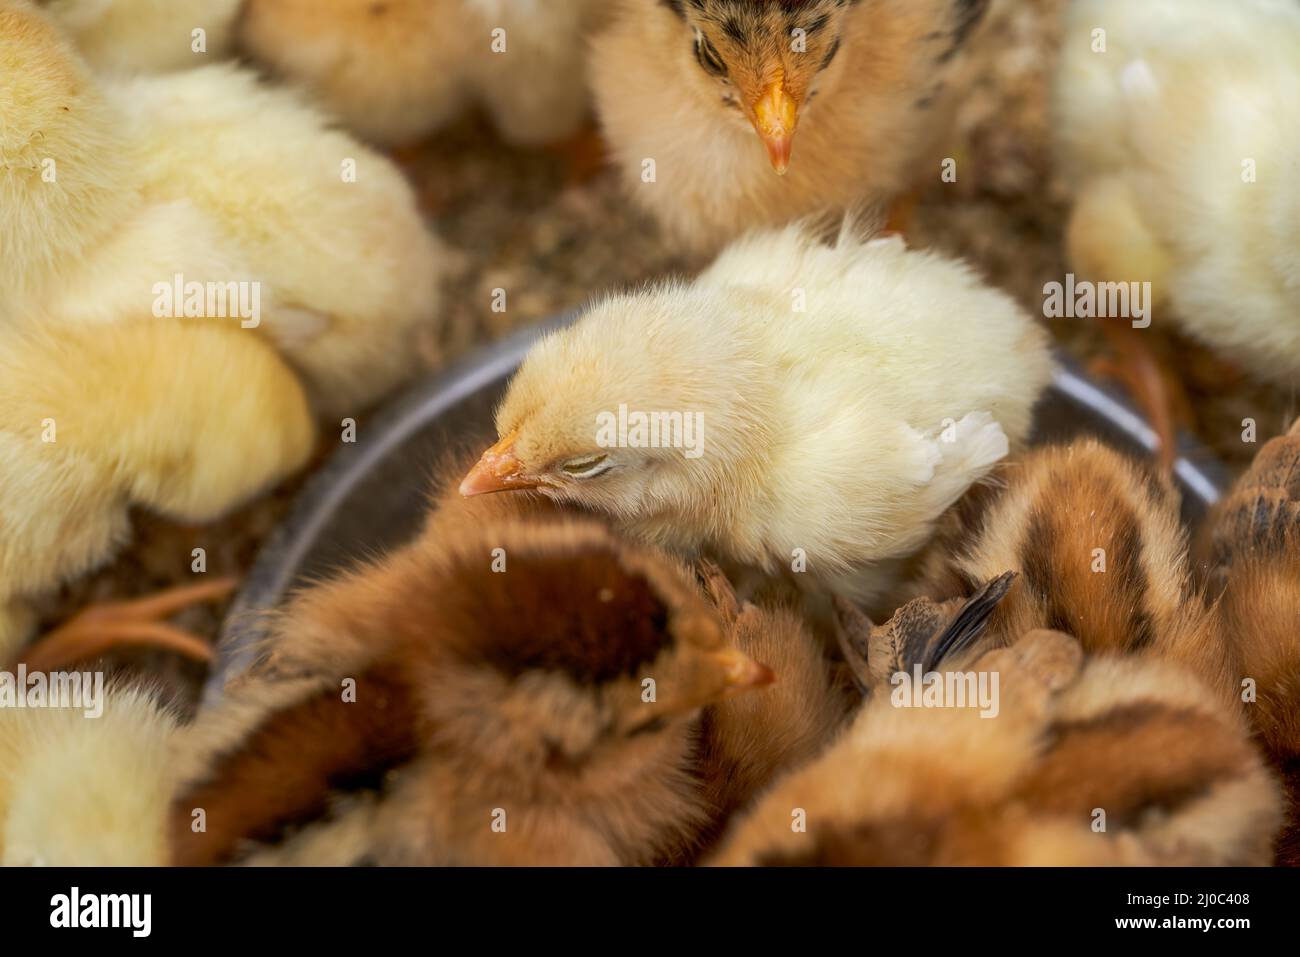 Newly hatched flock of chicks close-up Stock Photo